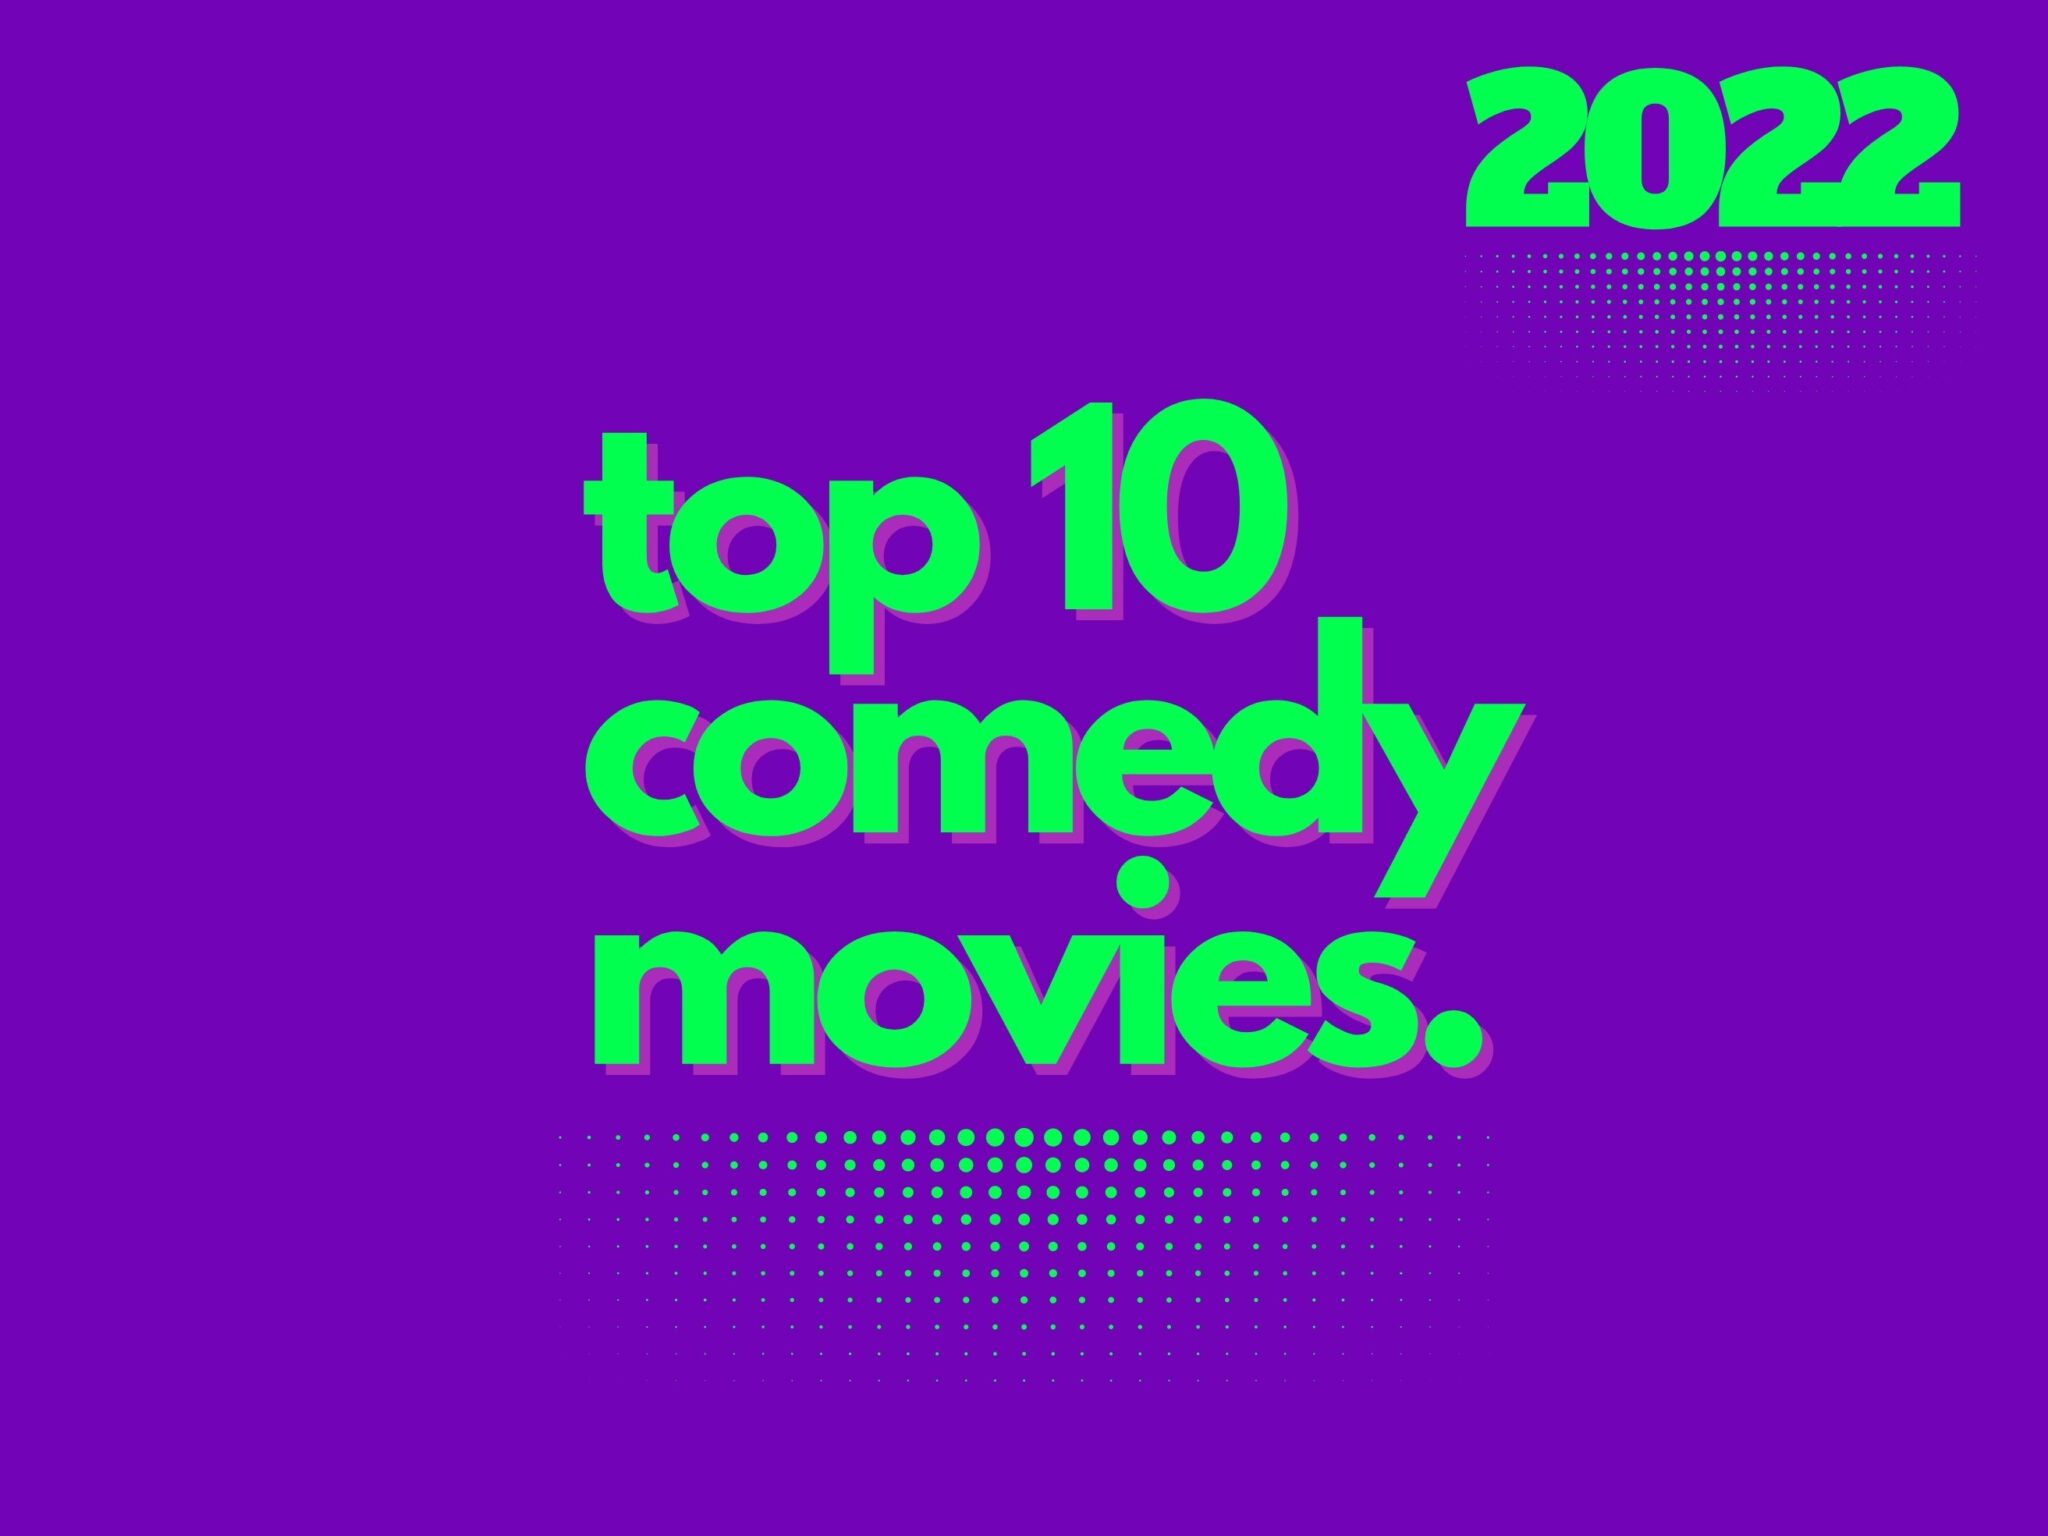 comedy movies coming 2022